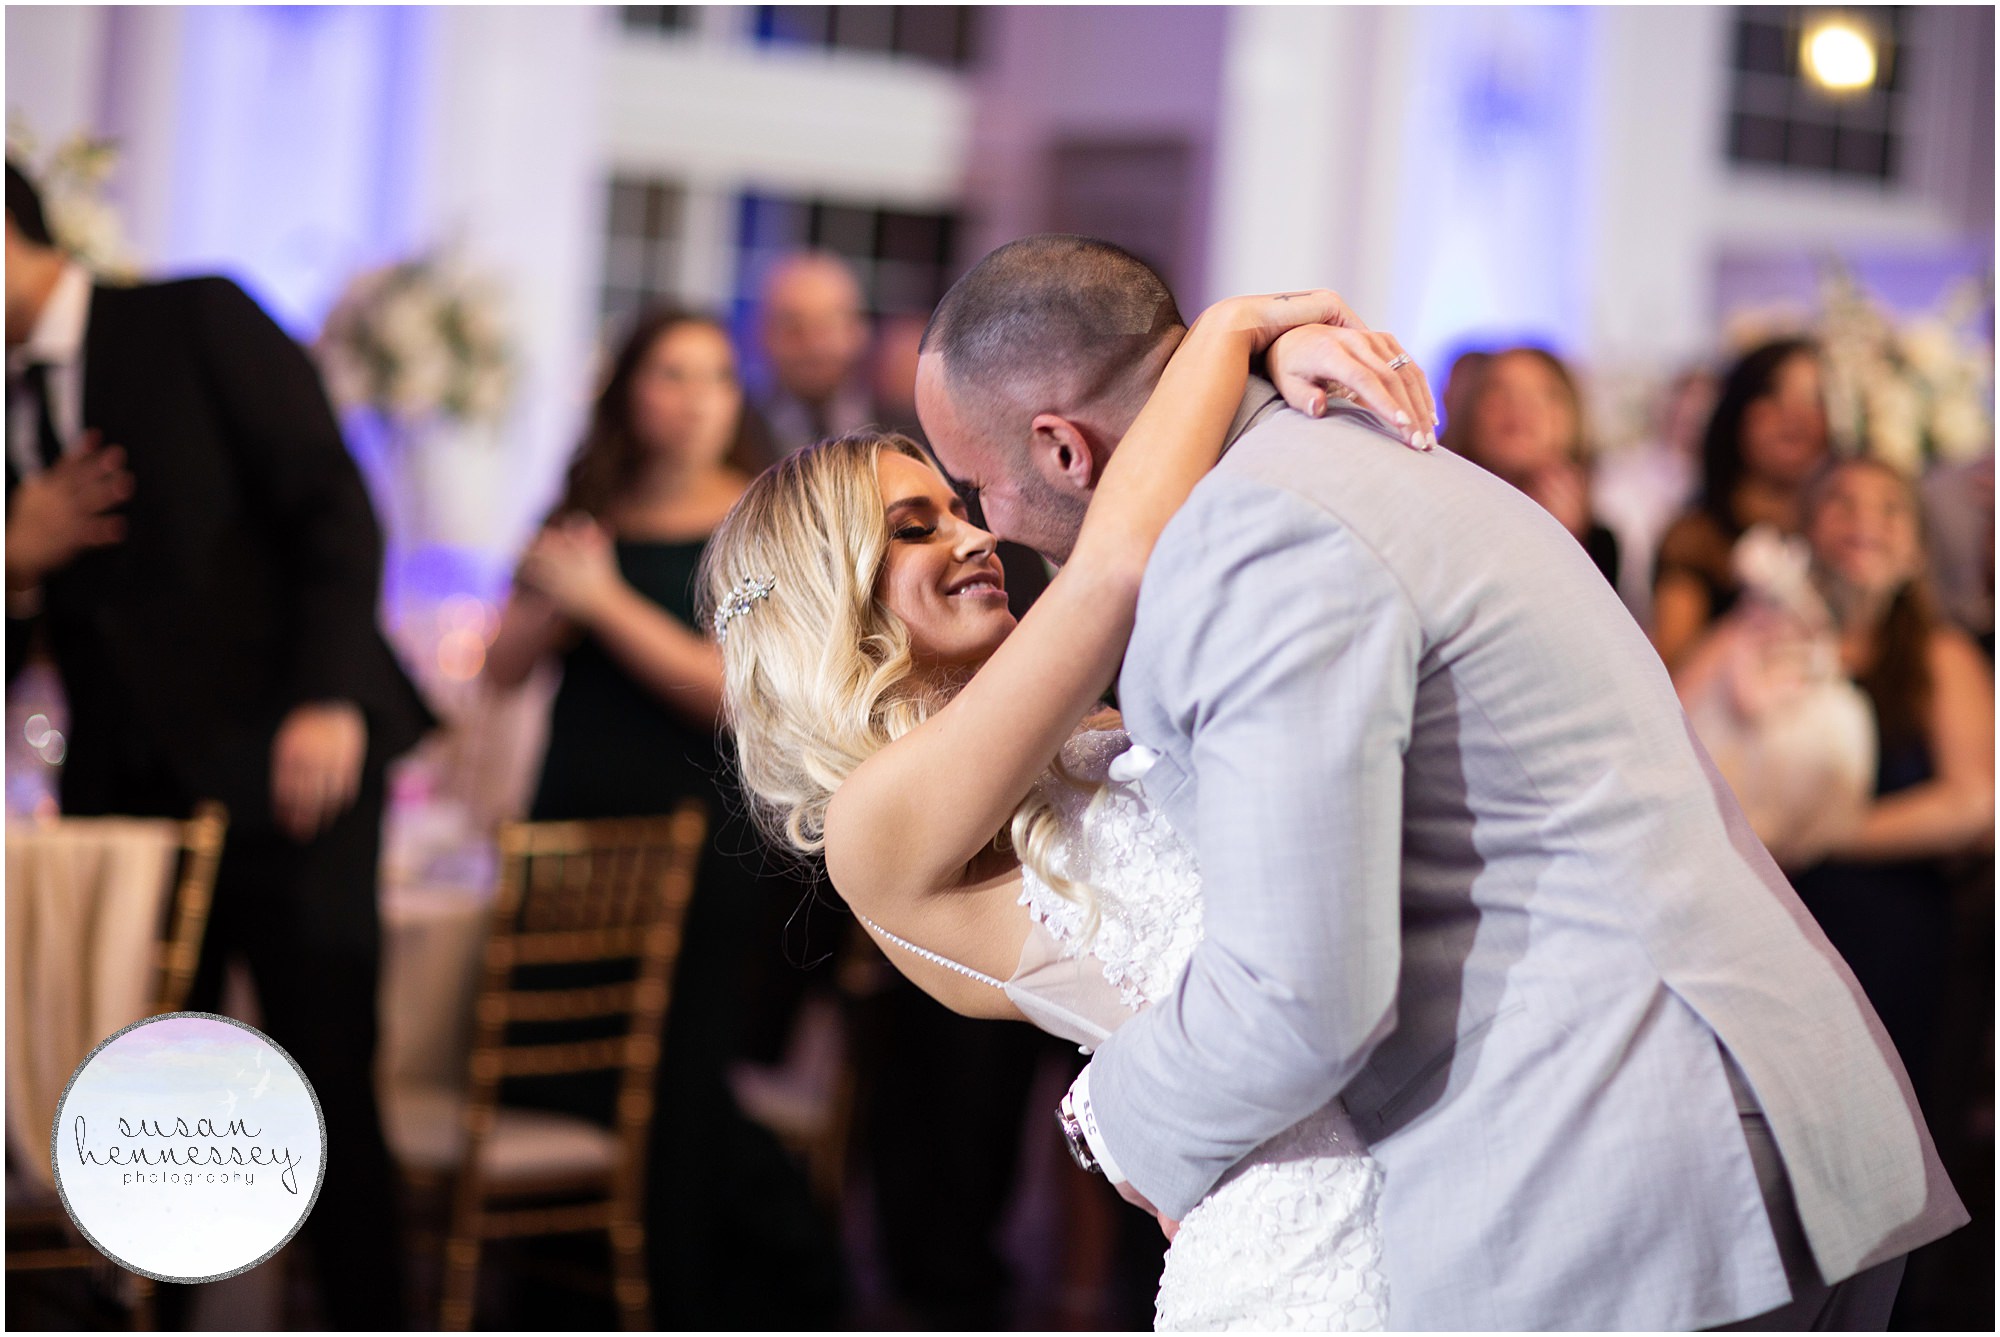 A bride and groom share their first dance 